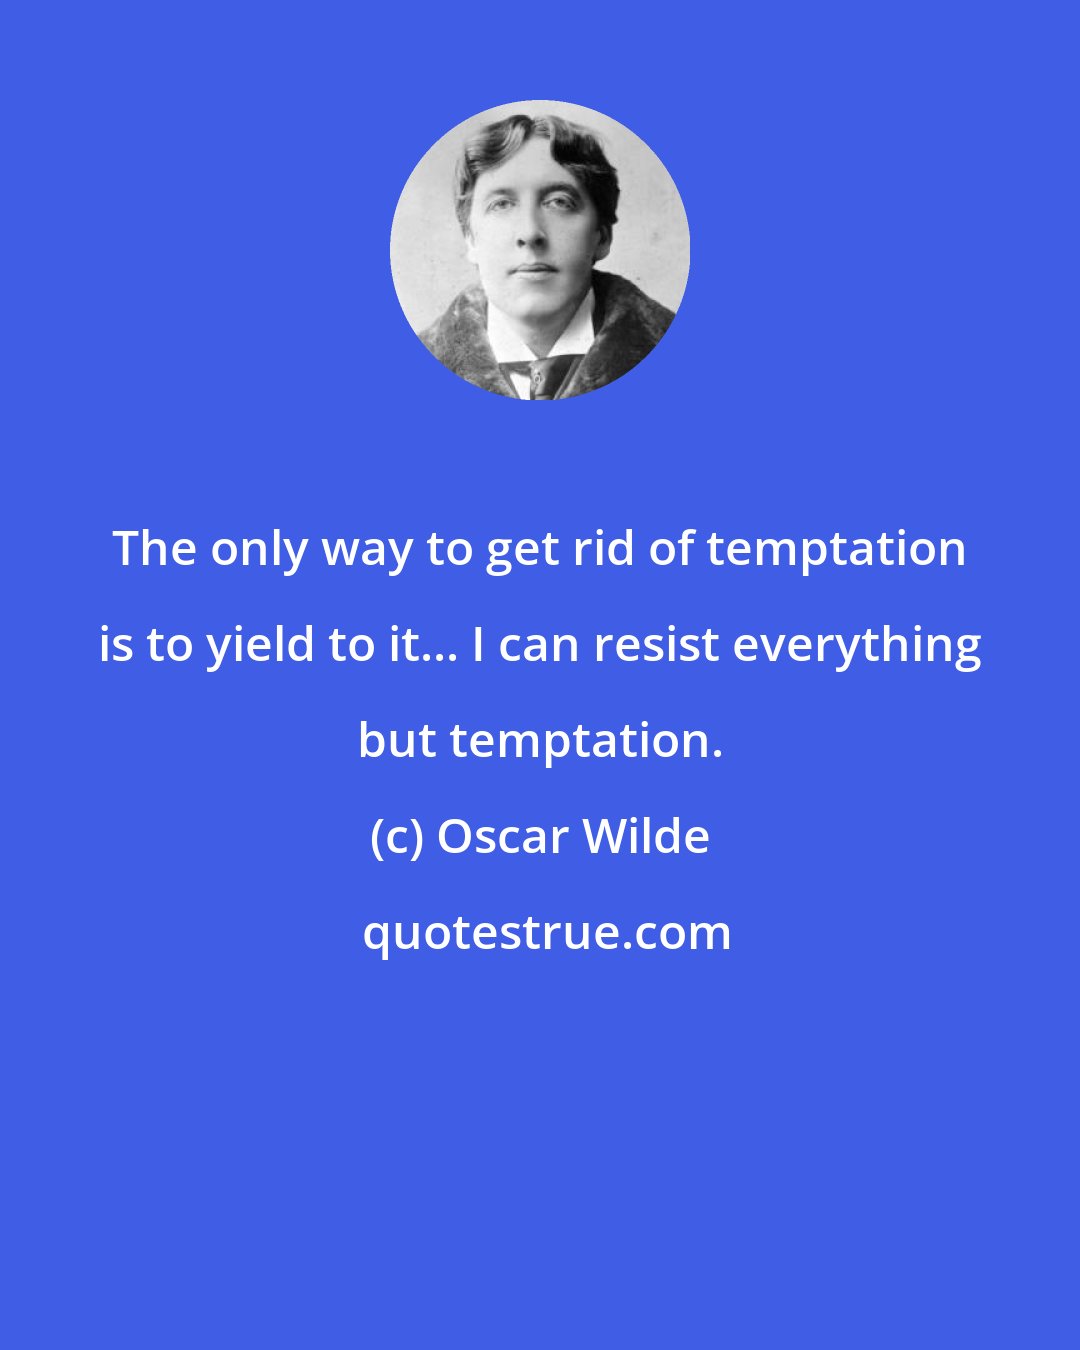 Oscar Wilde: The only way to get rid of temptation is to yield to it... I can resist everything but temptation.